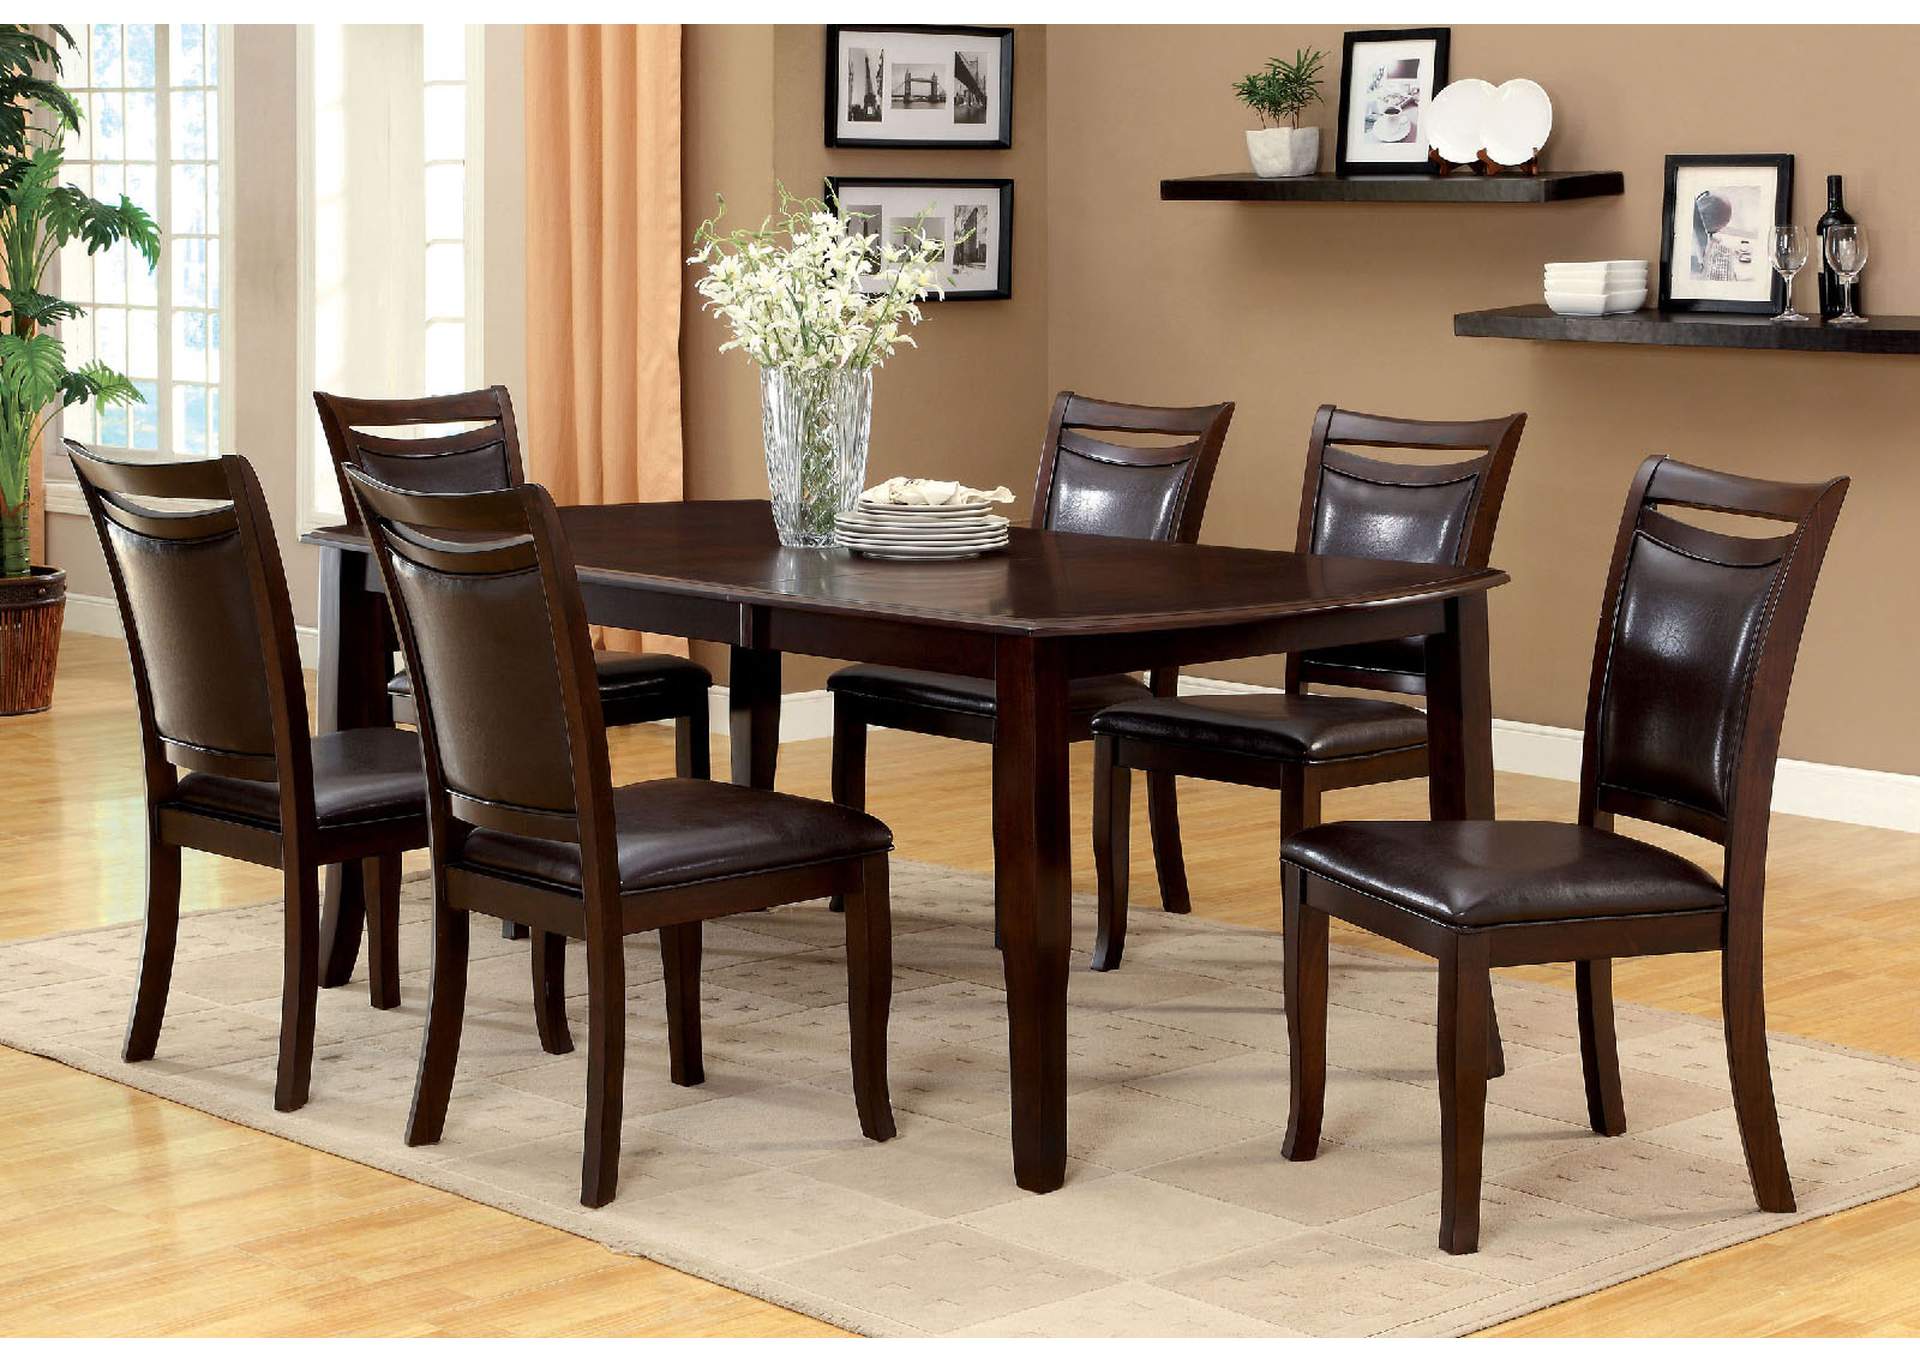 Woodside Dark Cherry Extension Leaf Dining Table w/6 Side Chairs,Furniture of America TX